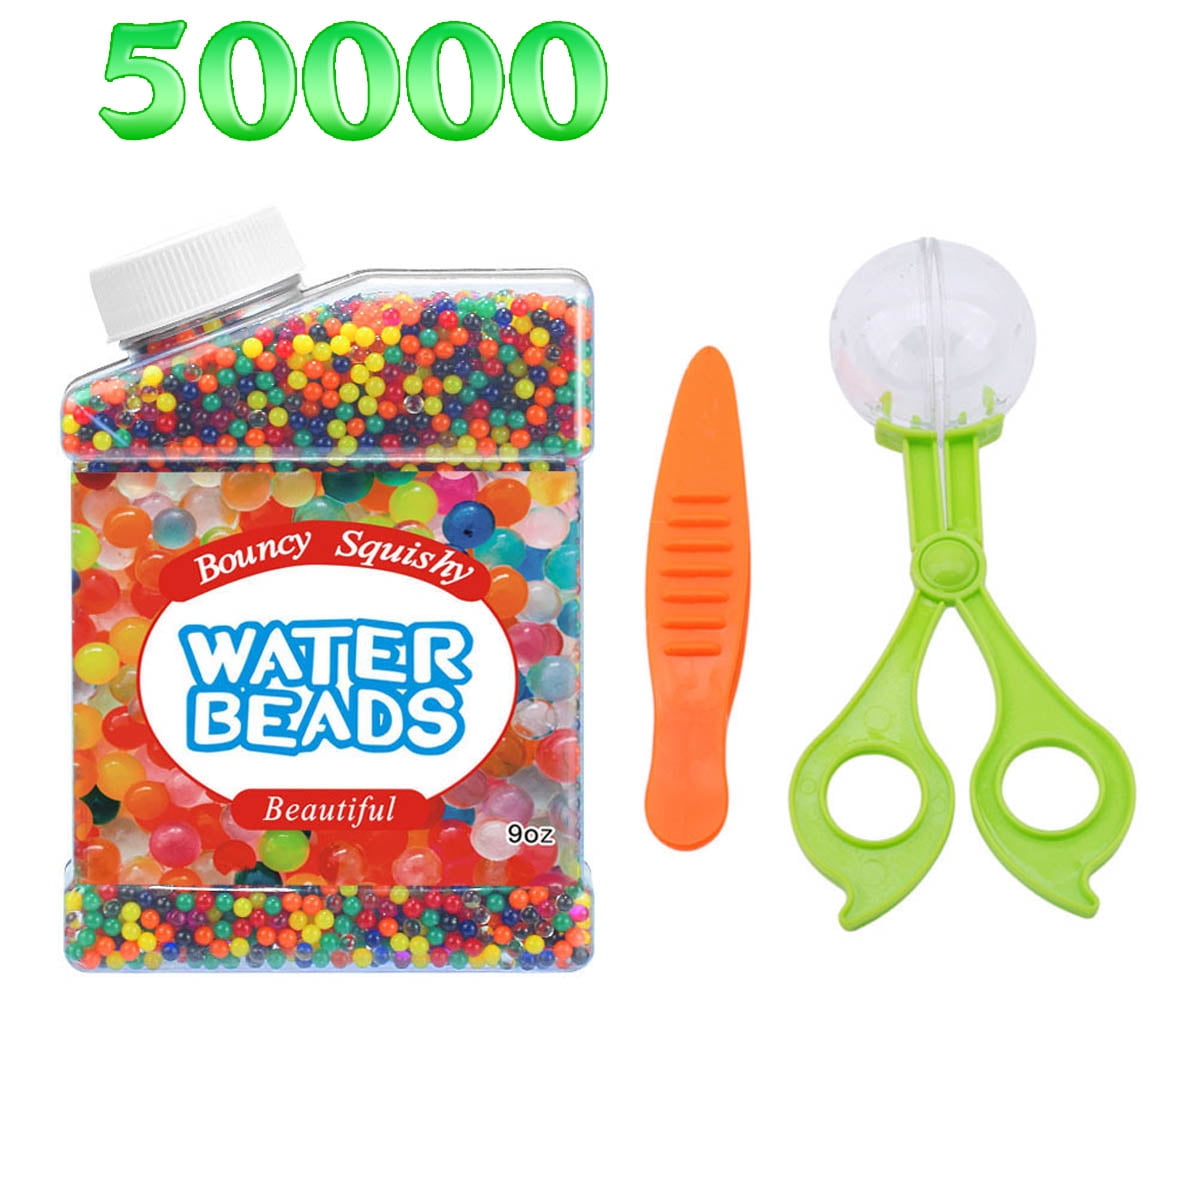 HI-US Adult Unisex 100g Reusable Moldable Plastic Thermoplastic Beads For  DIY Crafts Sculpting 